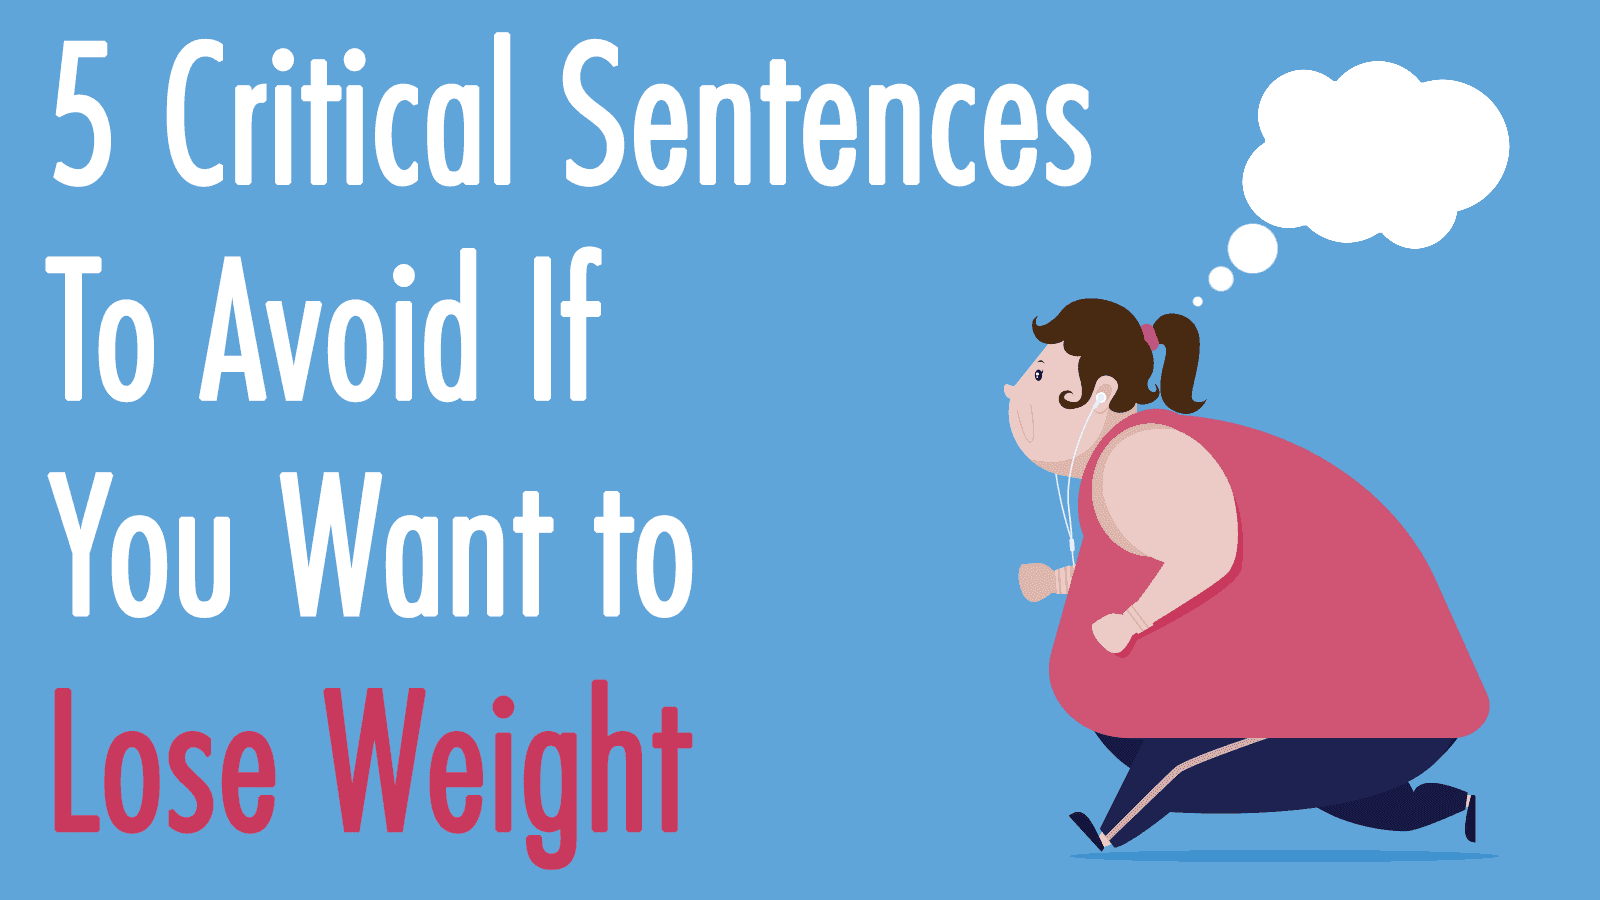 5 Critical Sentences To Avoid If You Want to Lose Weight